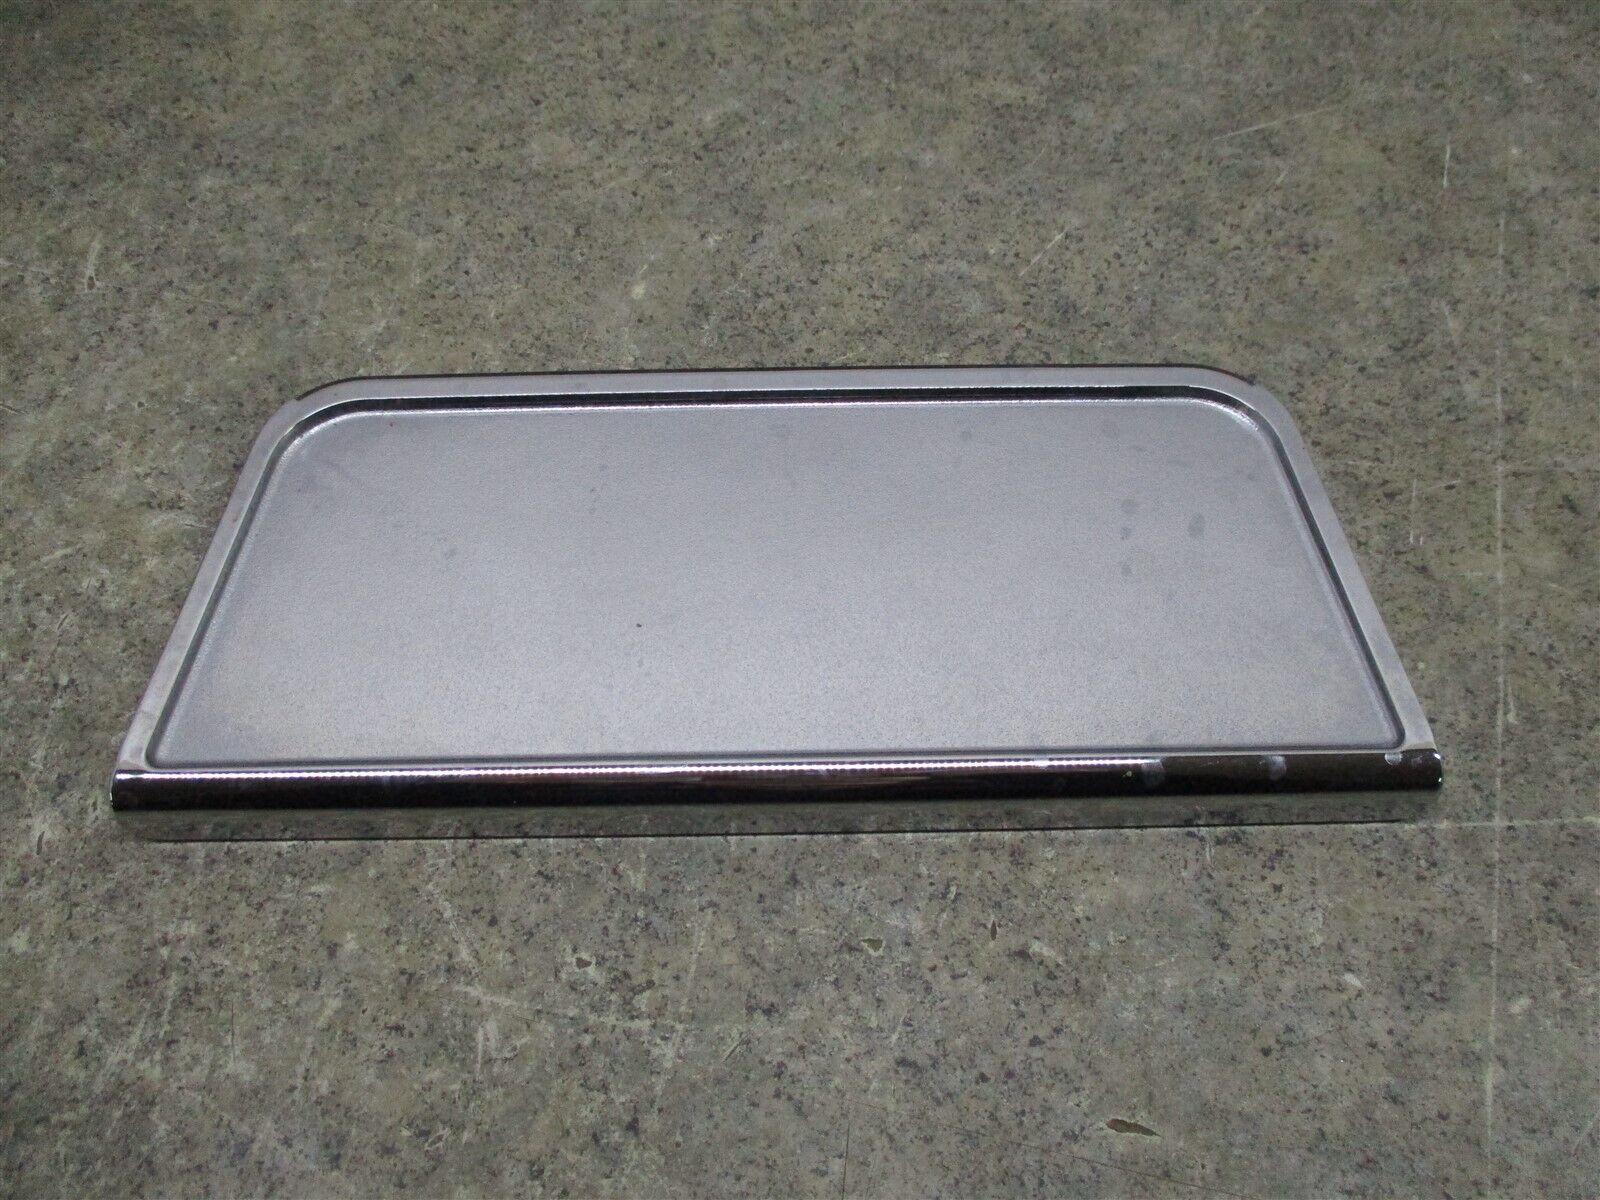 Primary image for WHIRLPOOL REFRIGERATOR DRIP TRAY PART # W11209885